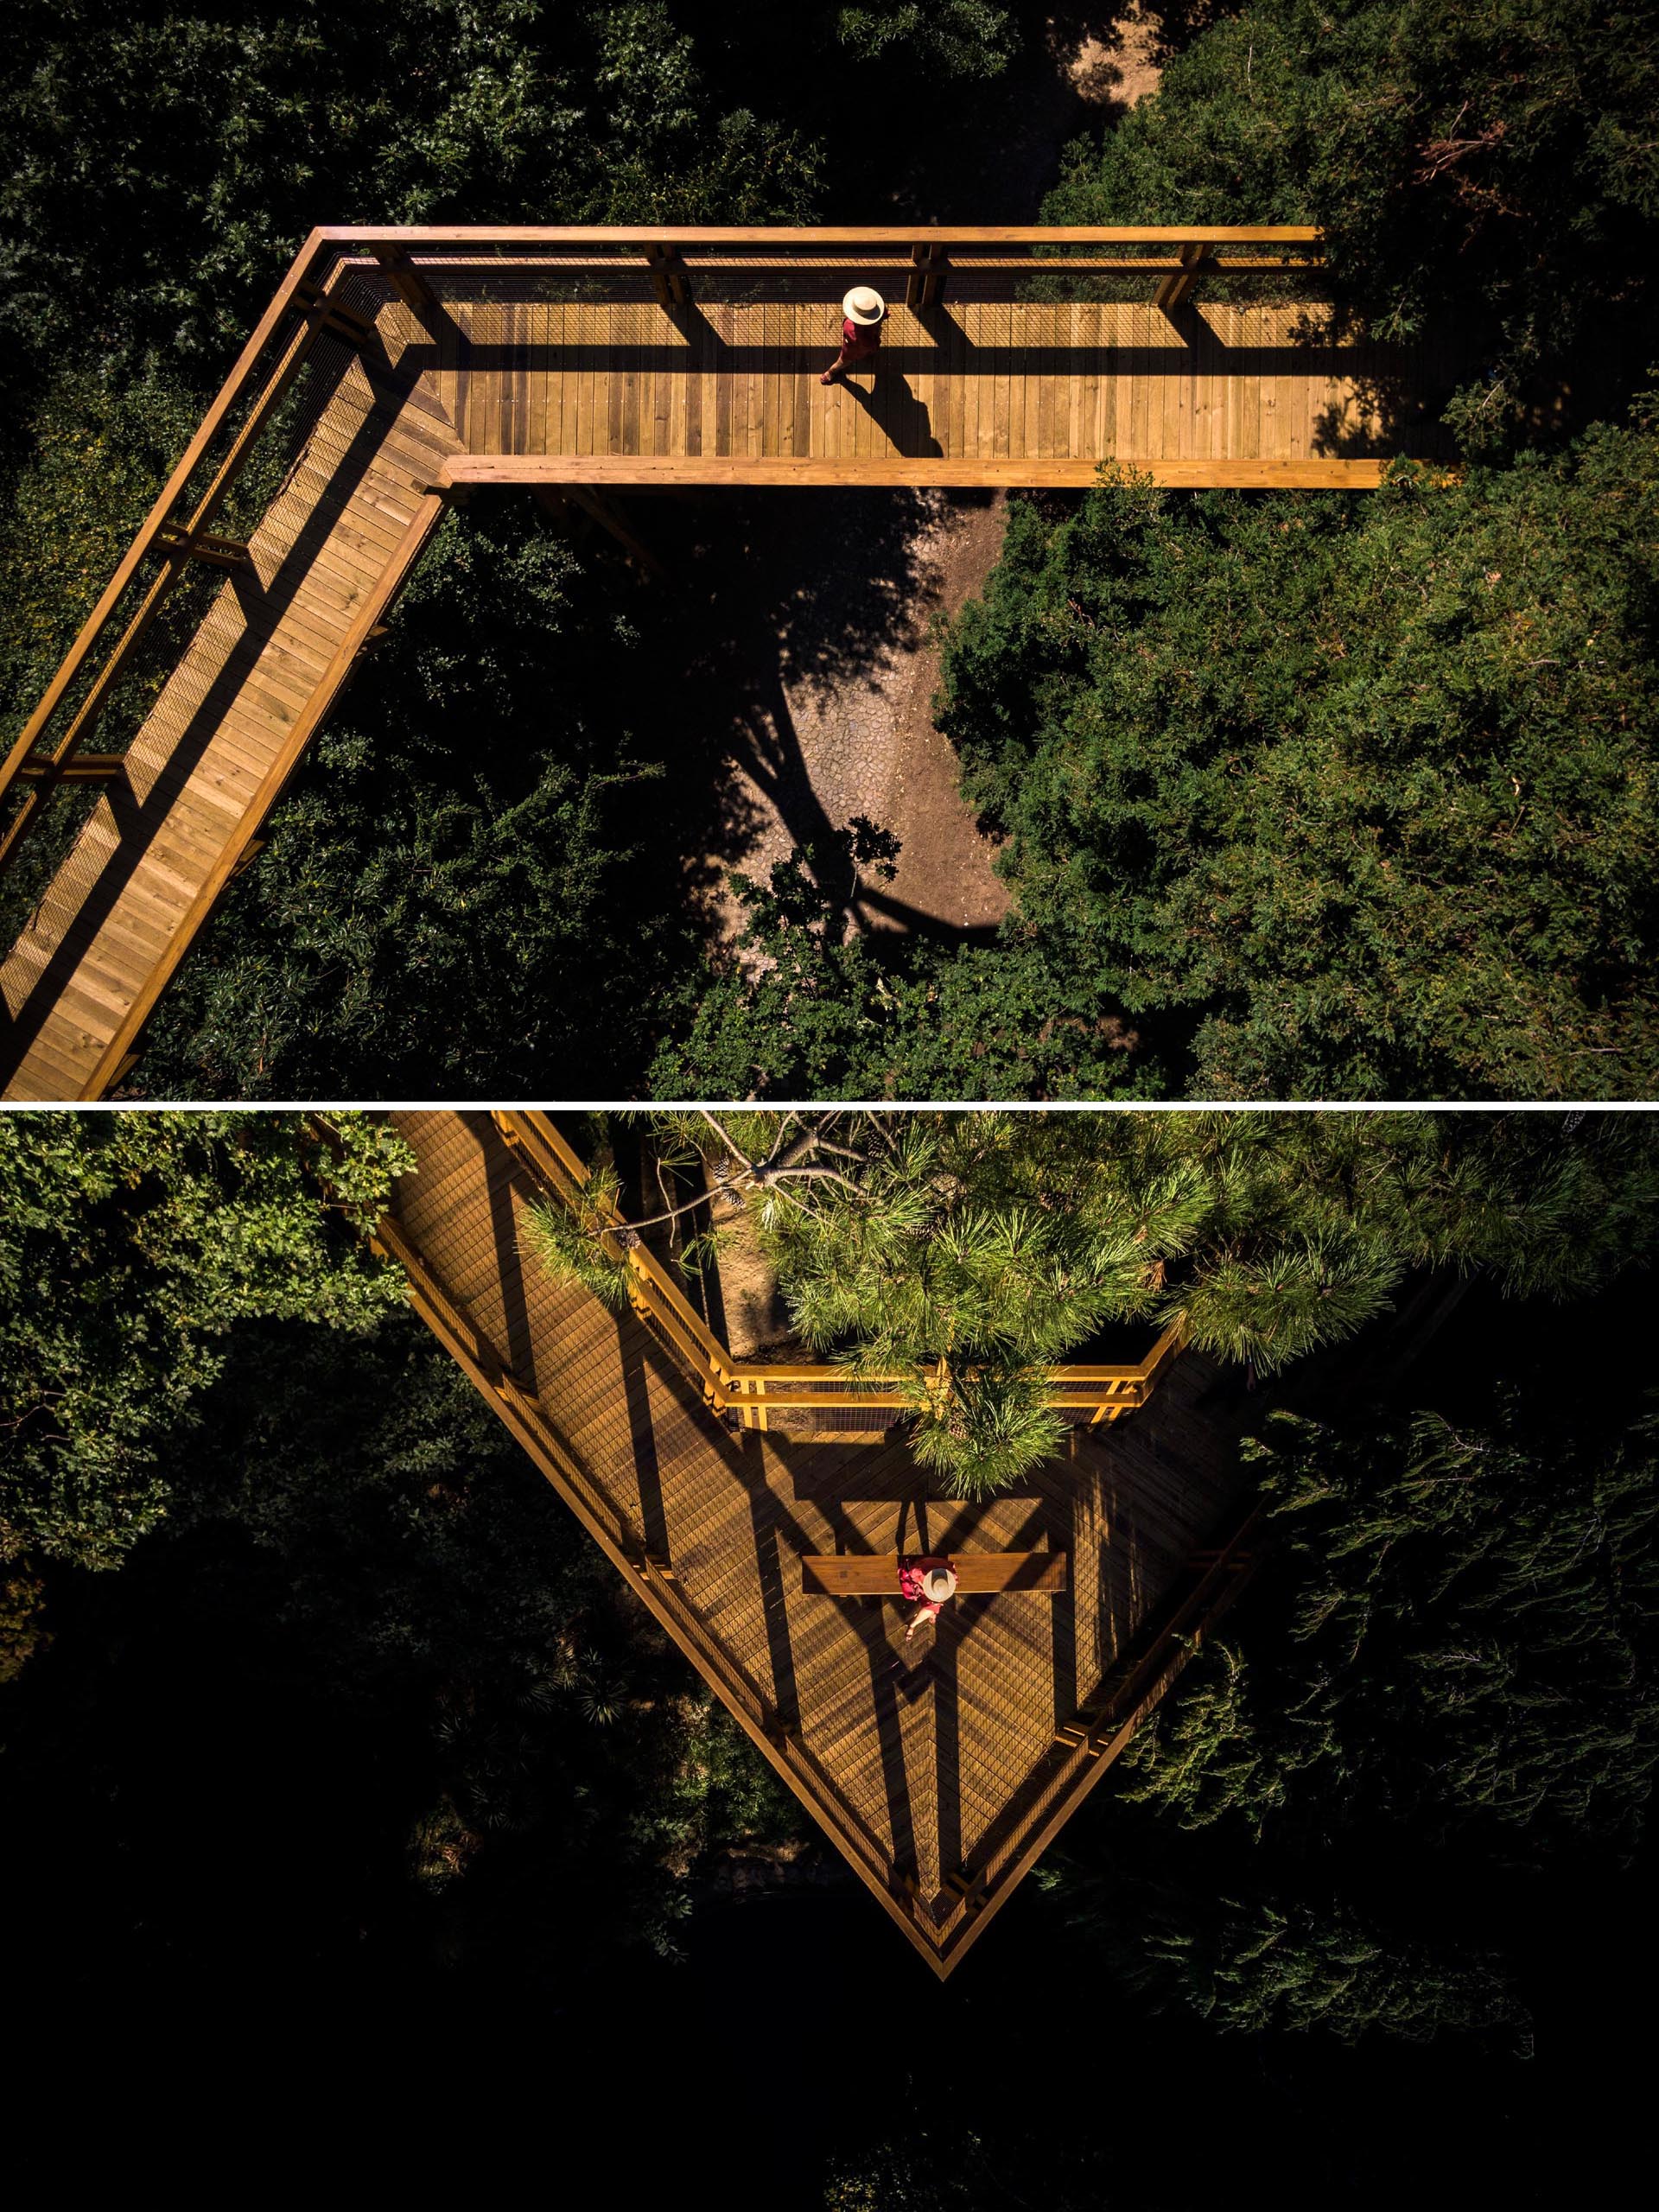 A treetop canopy walk weaves it way through the trees for amazing views.